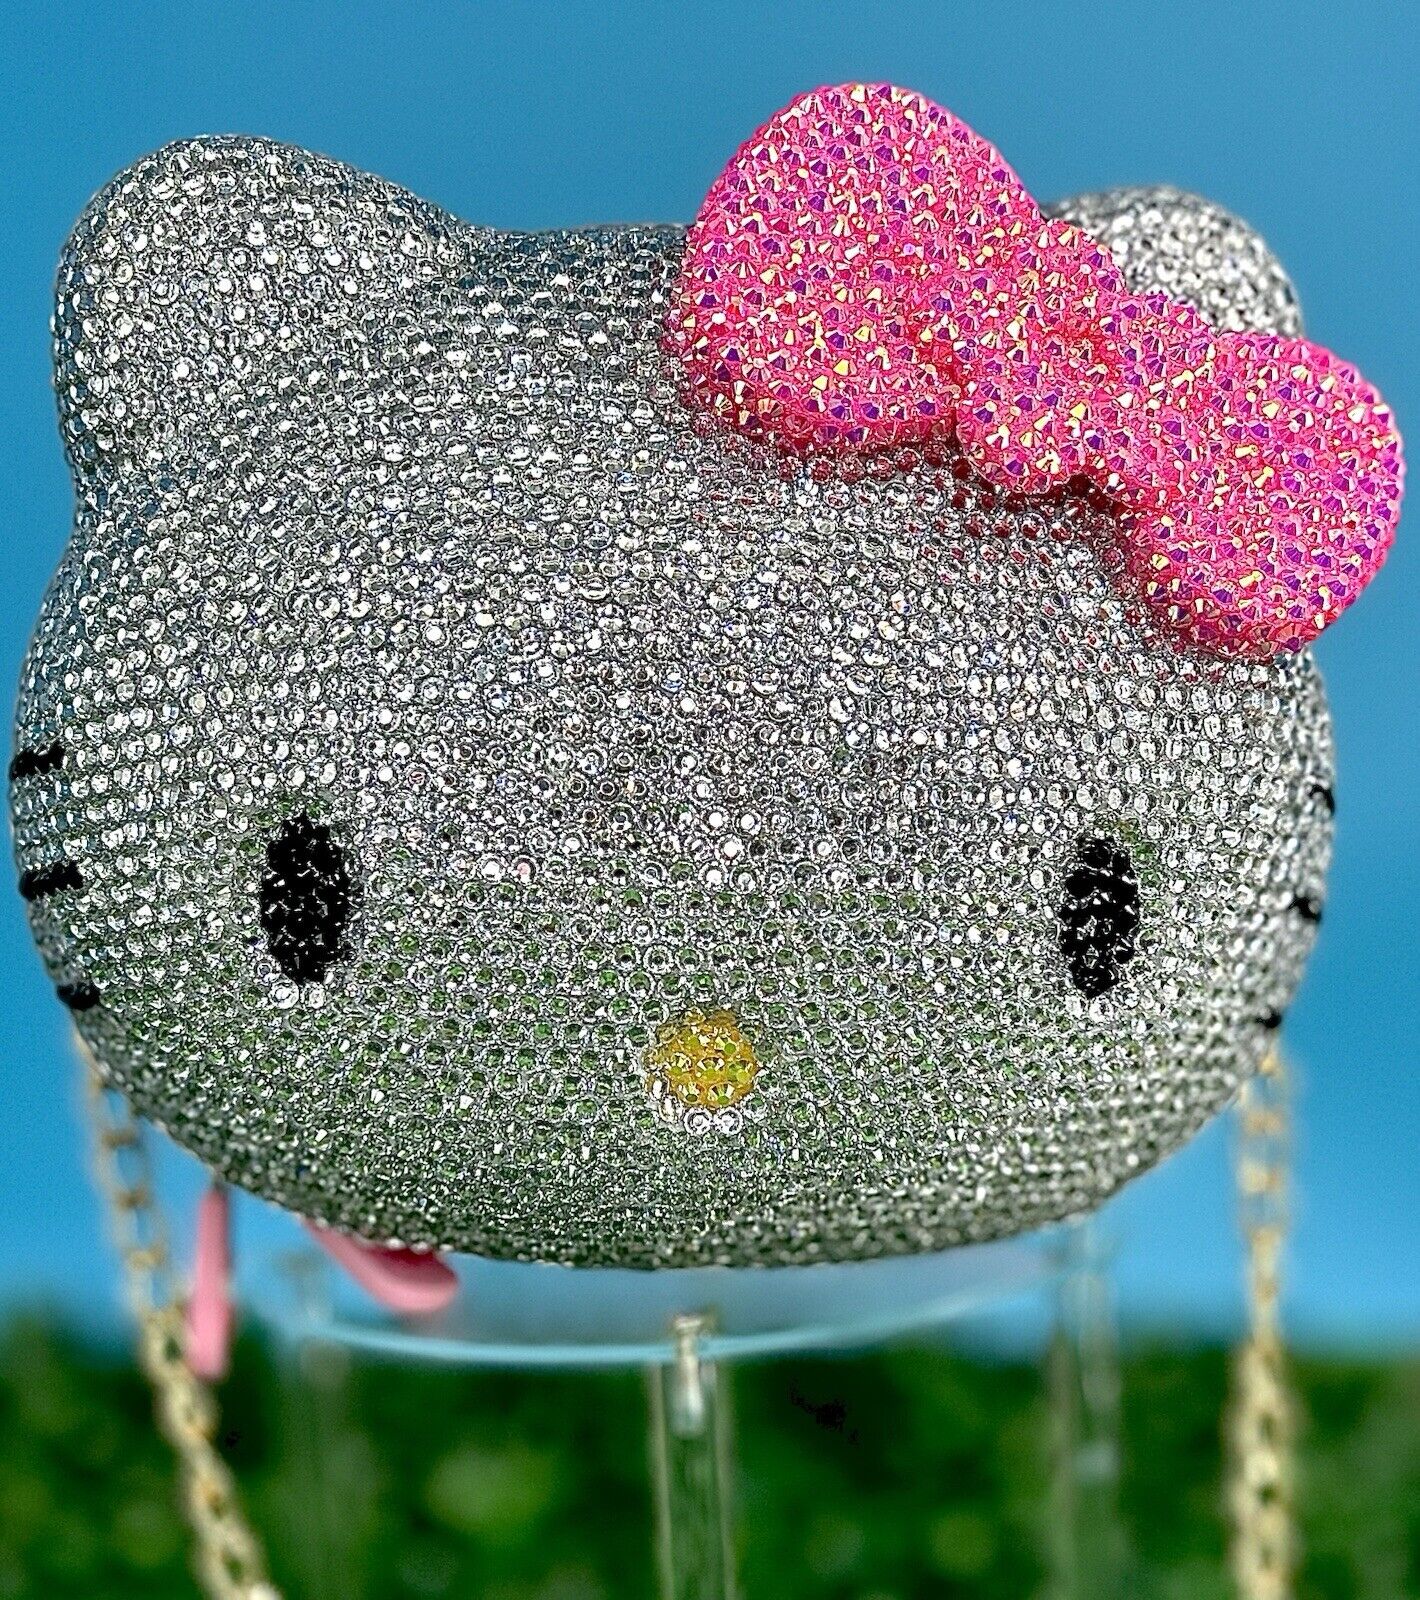 HELLO KITTY BEDAZZLED BLING DIAMOND CRYSTAL CLUTCH PURSE BRIDE BRIDESMAID GIFT 